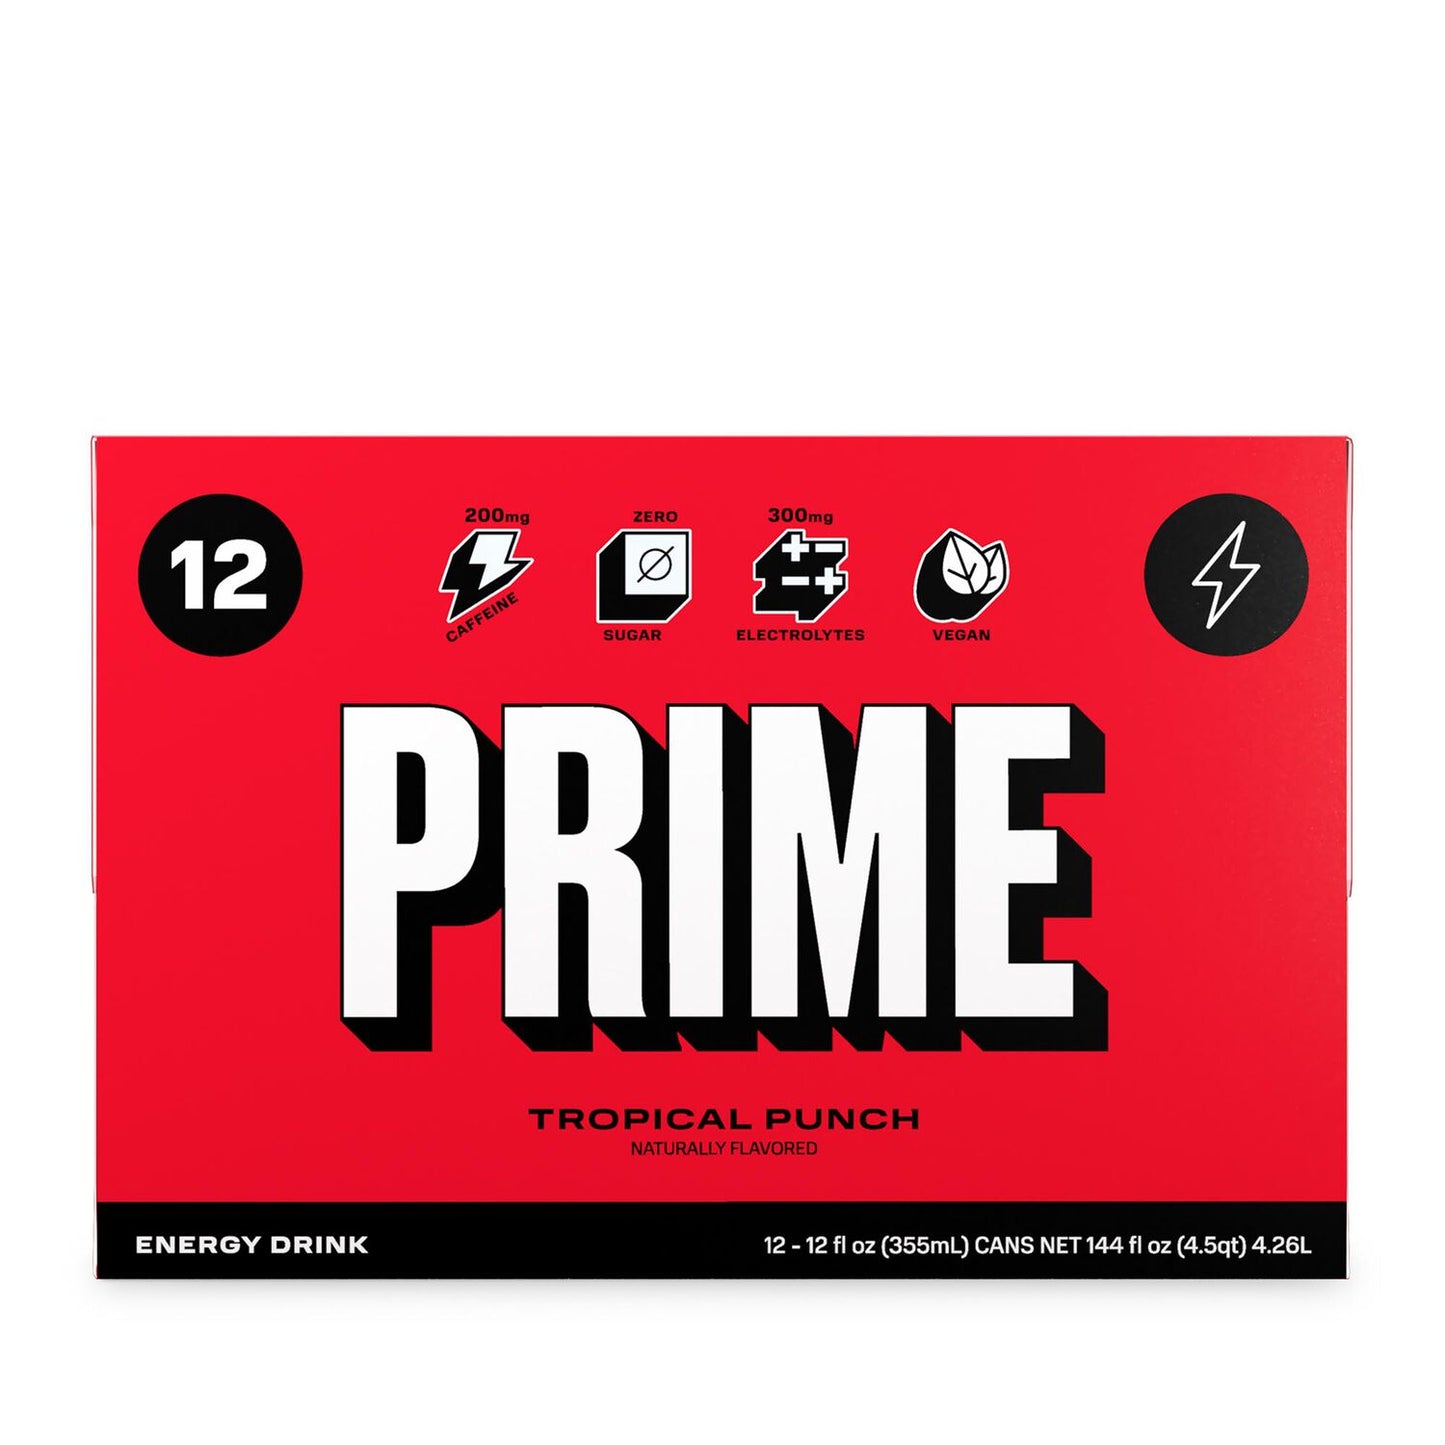 PRIME Energy TROPICAL PUNCH | Zero Sugar Energy Drink | Preworkout Energy | 200mg Caffeine with 300mg of Electrolytes and Coconut Water for Hydration| Vegan | Gluten Free |12 Fluid Ounce | 12 Pack